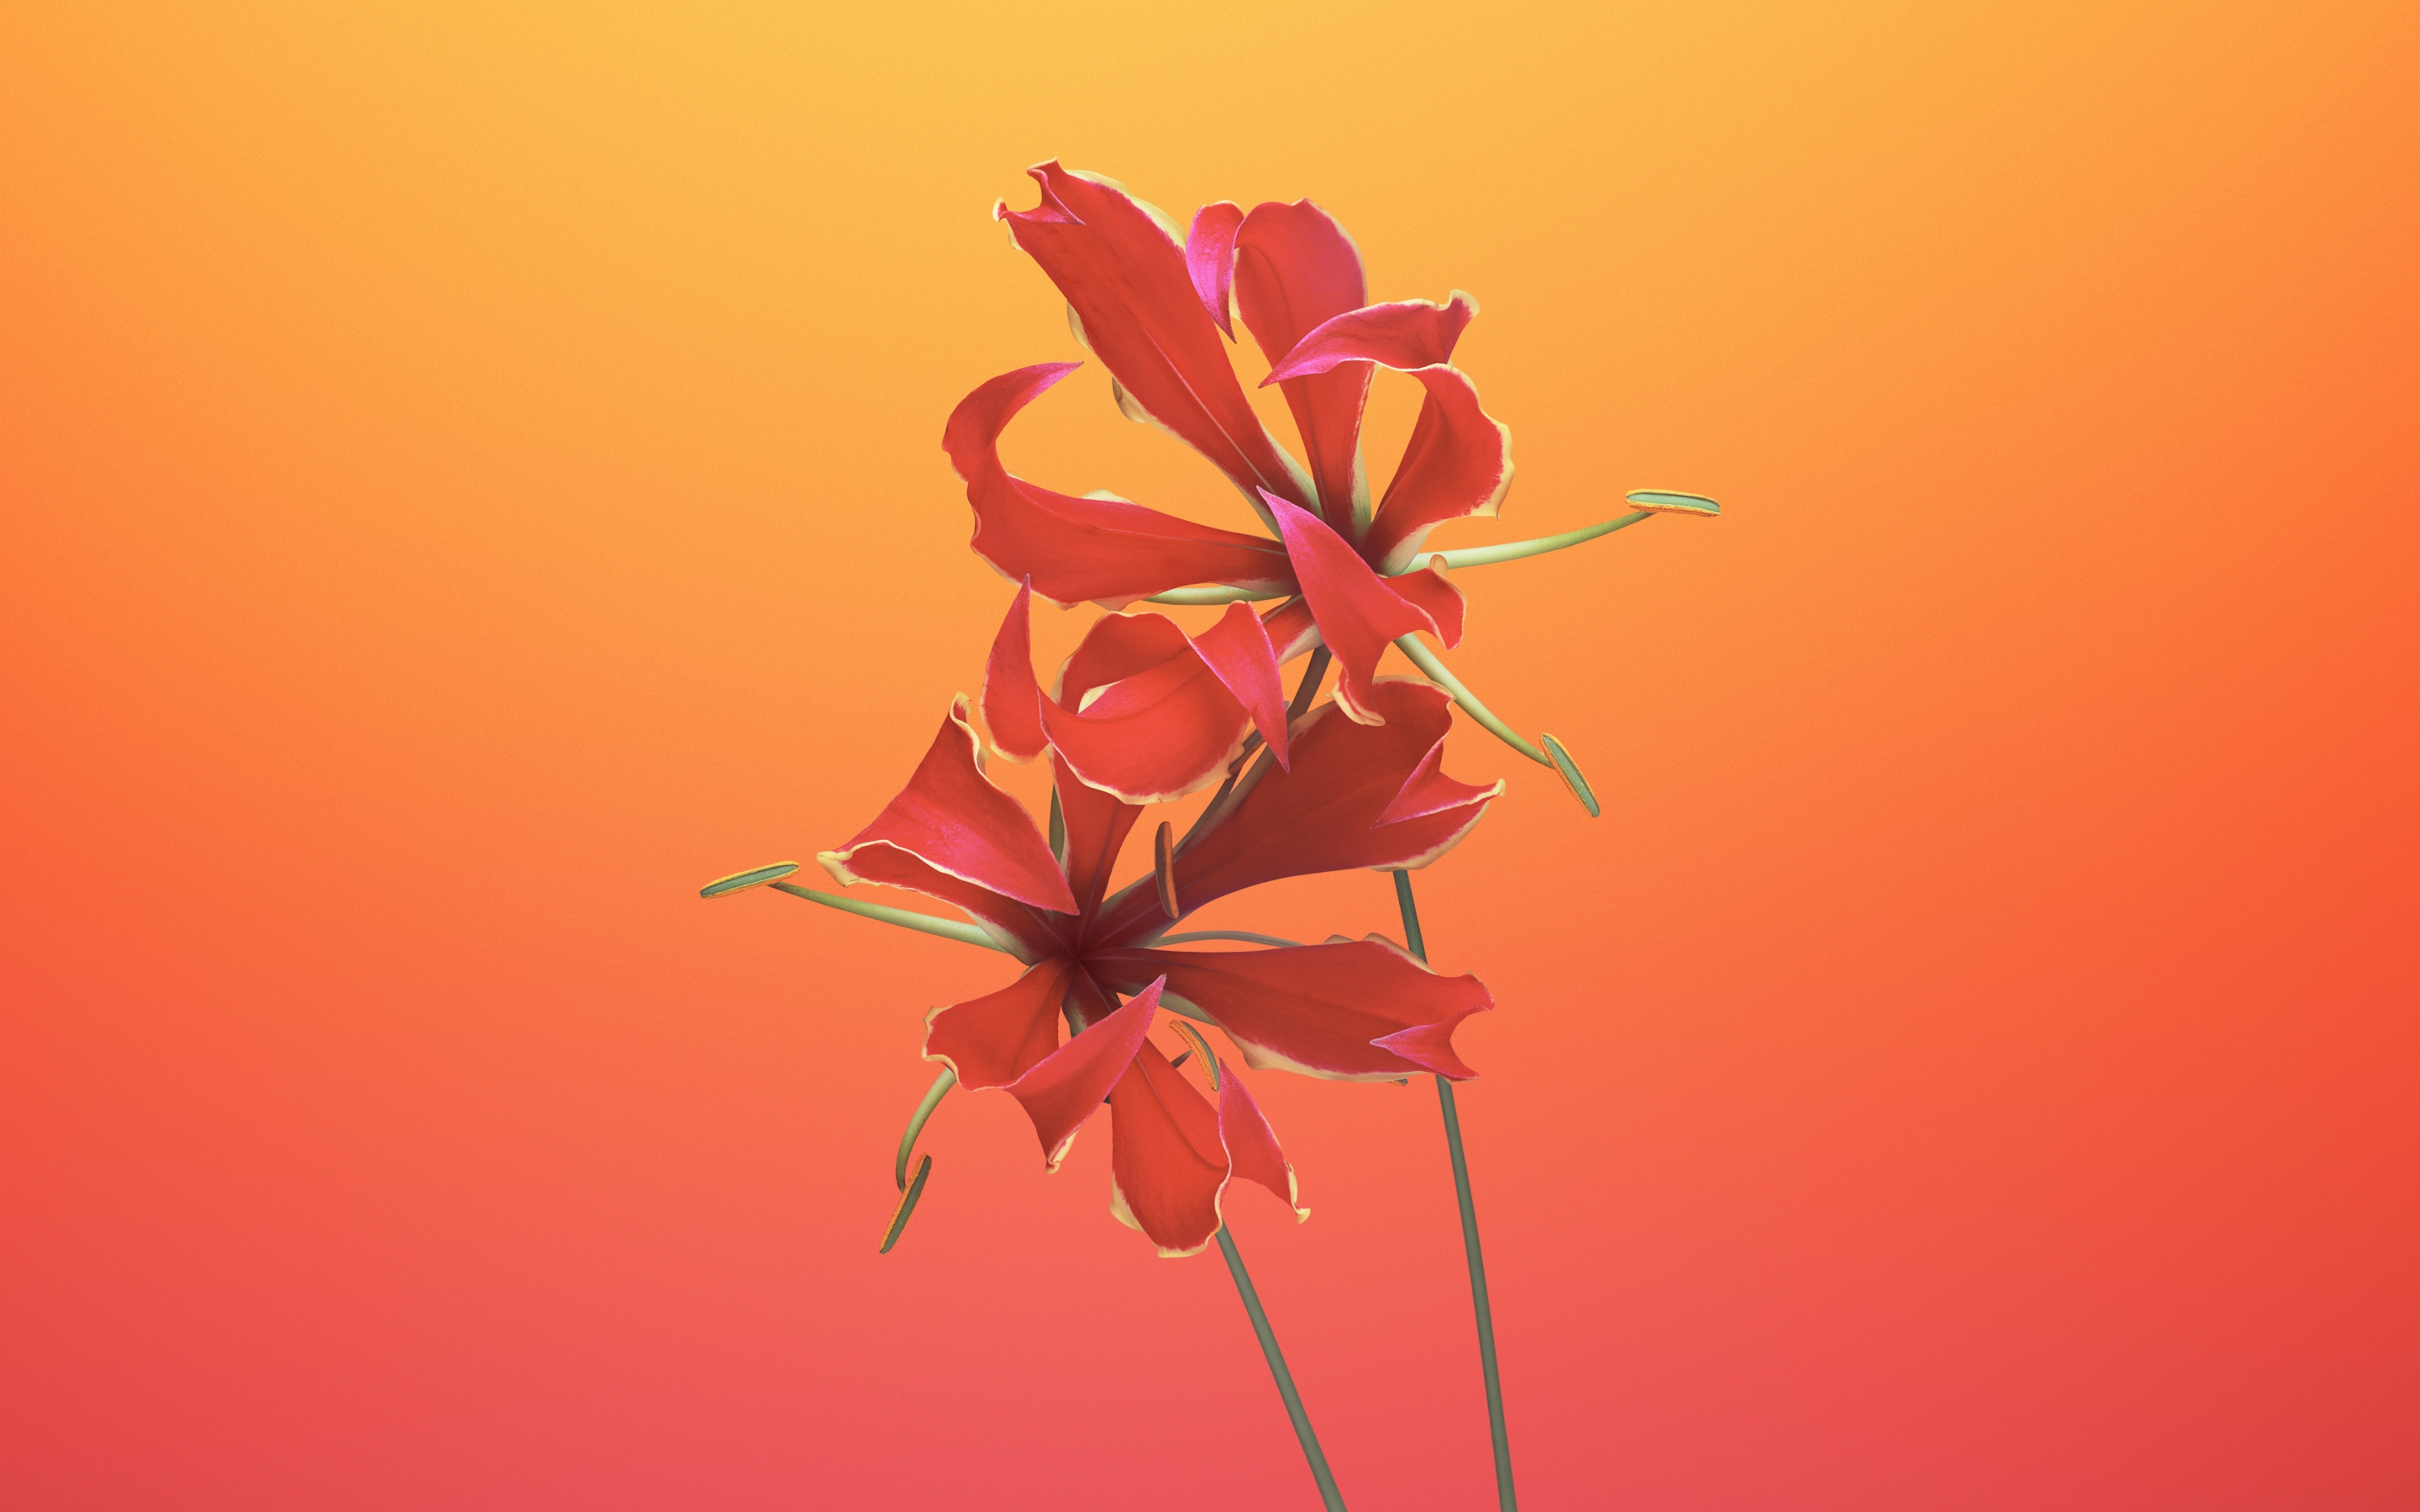 Lily flower, macOs Mojave iOS, 11 stock, 2880x1800 wallpaper